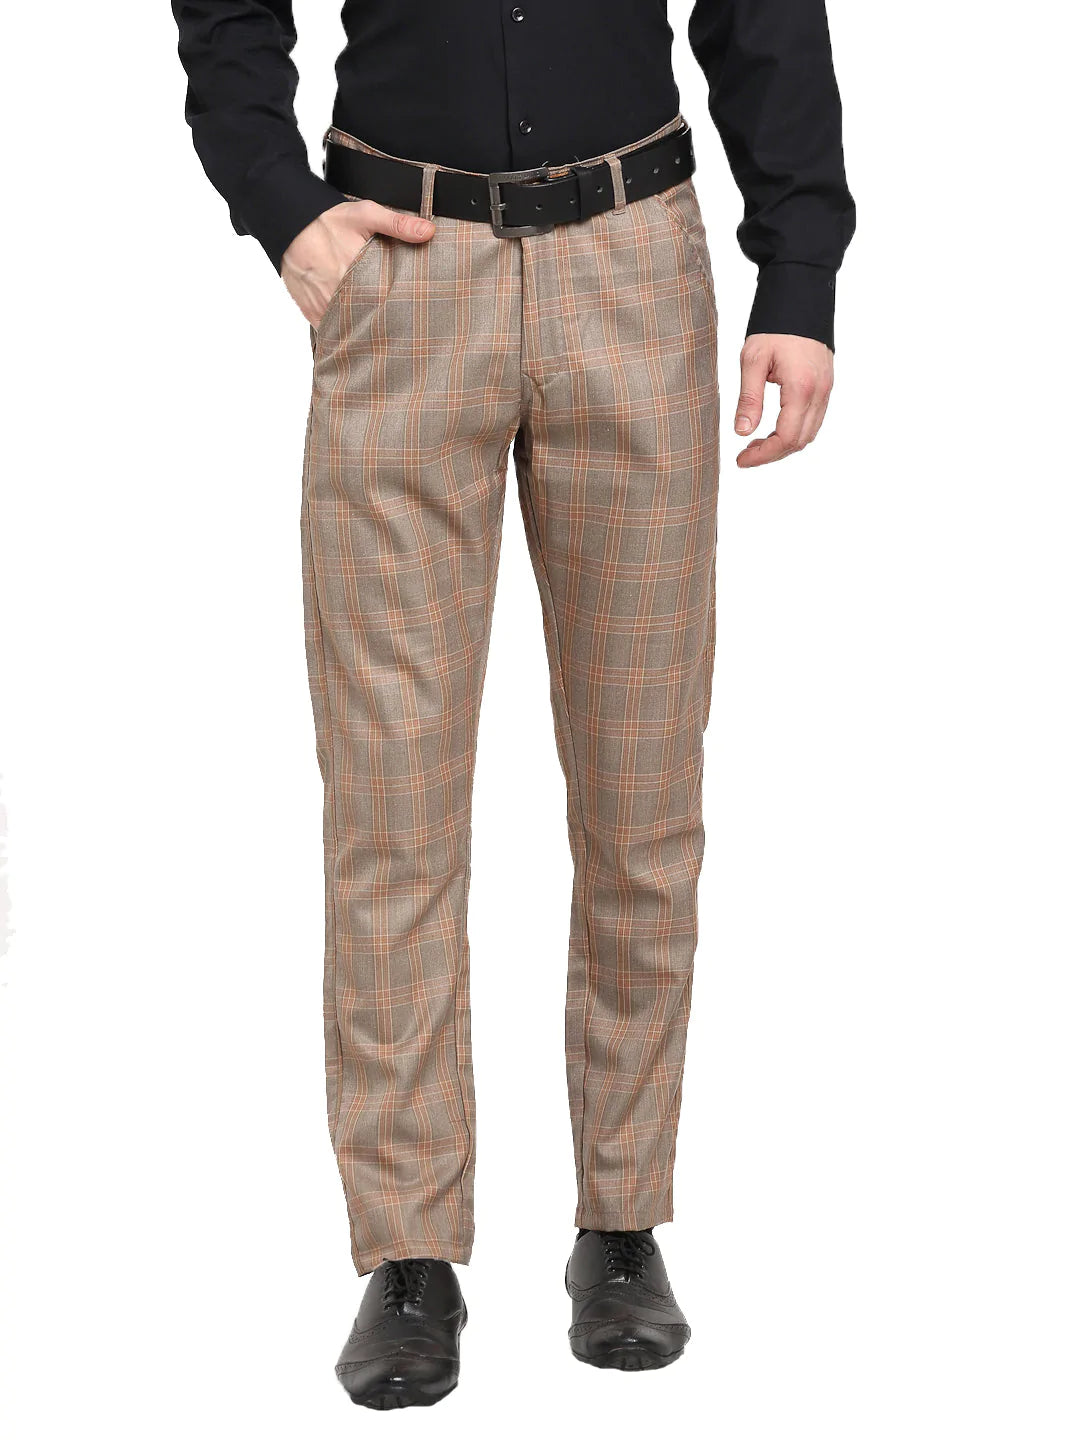 Jainish Men's Brown Cotton Checked Formal Trousers ( FGP 267Brown )